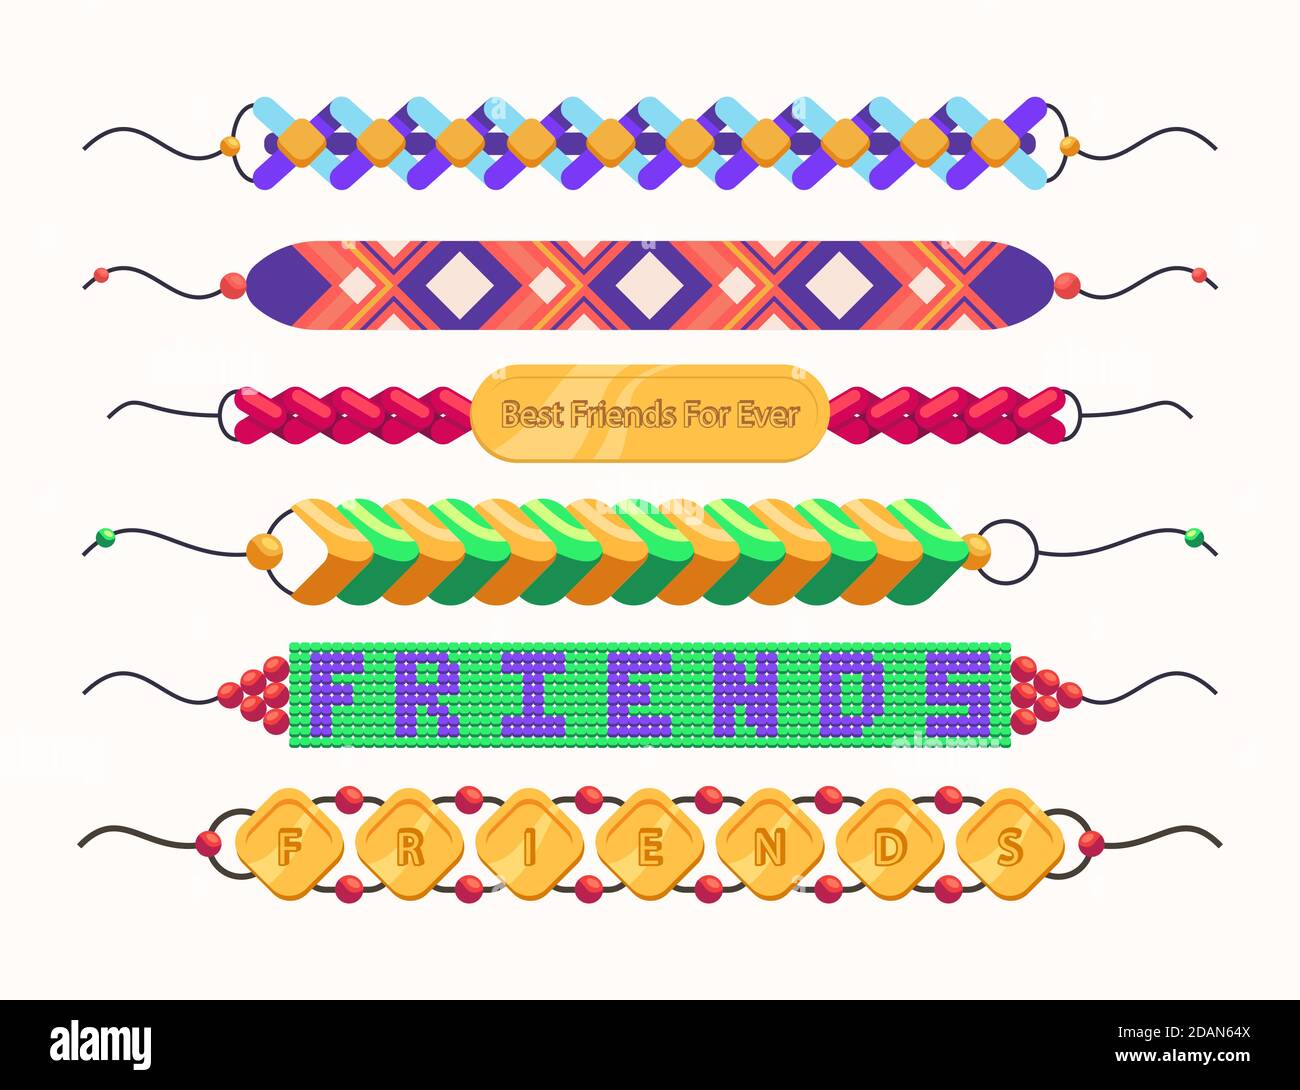 Colorful friendship band collection illustration Vector Stock Vector